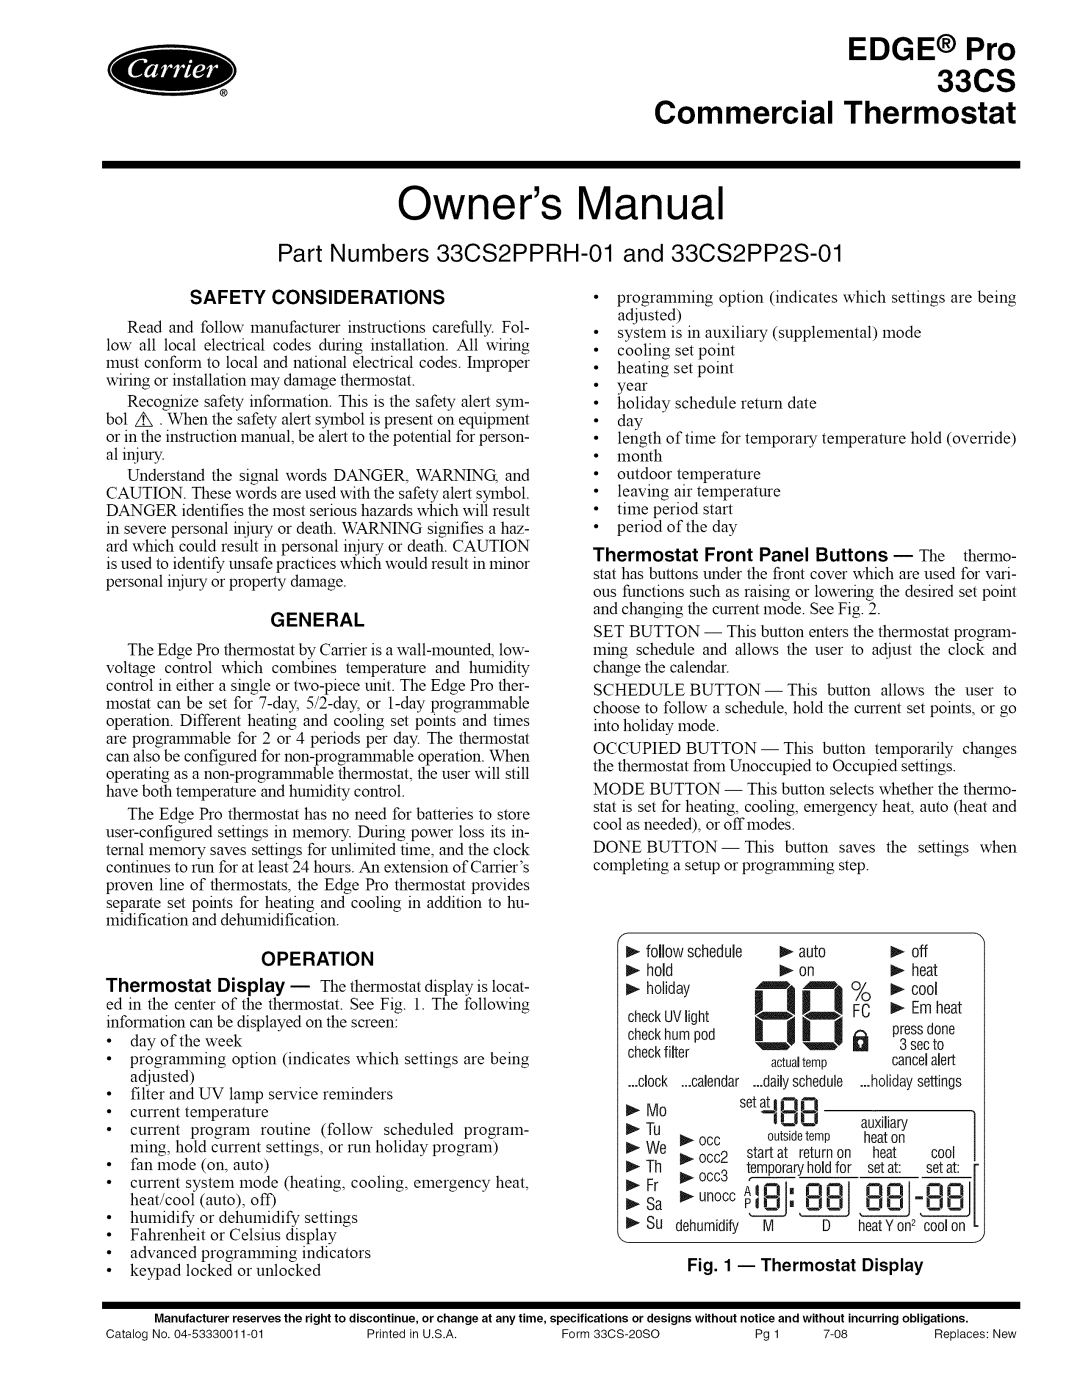 Carrier owner manual Part Numbers 33CS2PPRH-01 and 33CS2PP2S-01, Thermostat Front Panel Buttons-- The thermo, General 